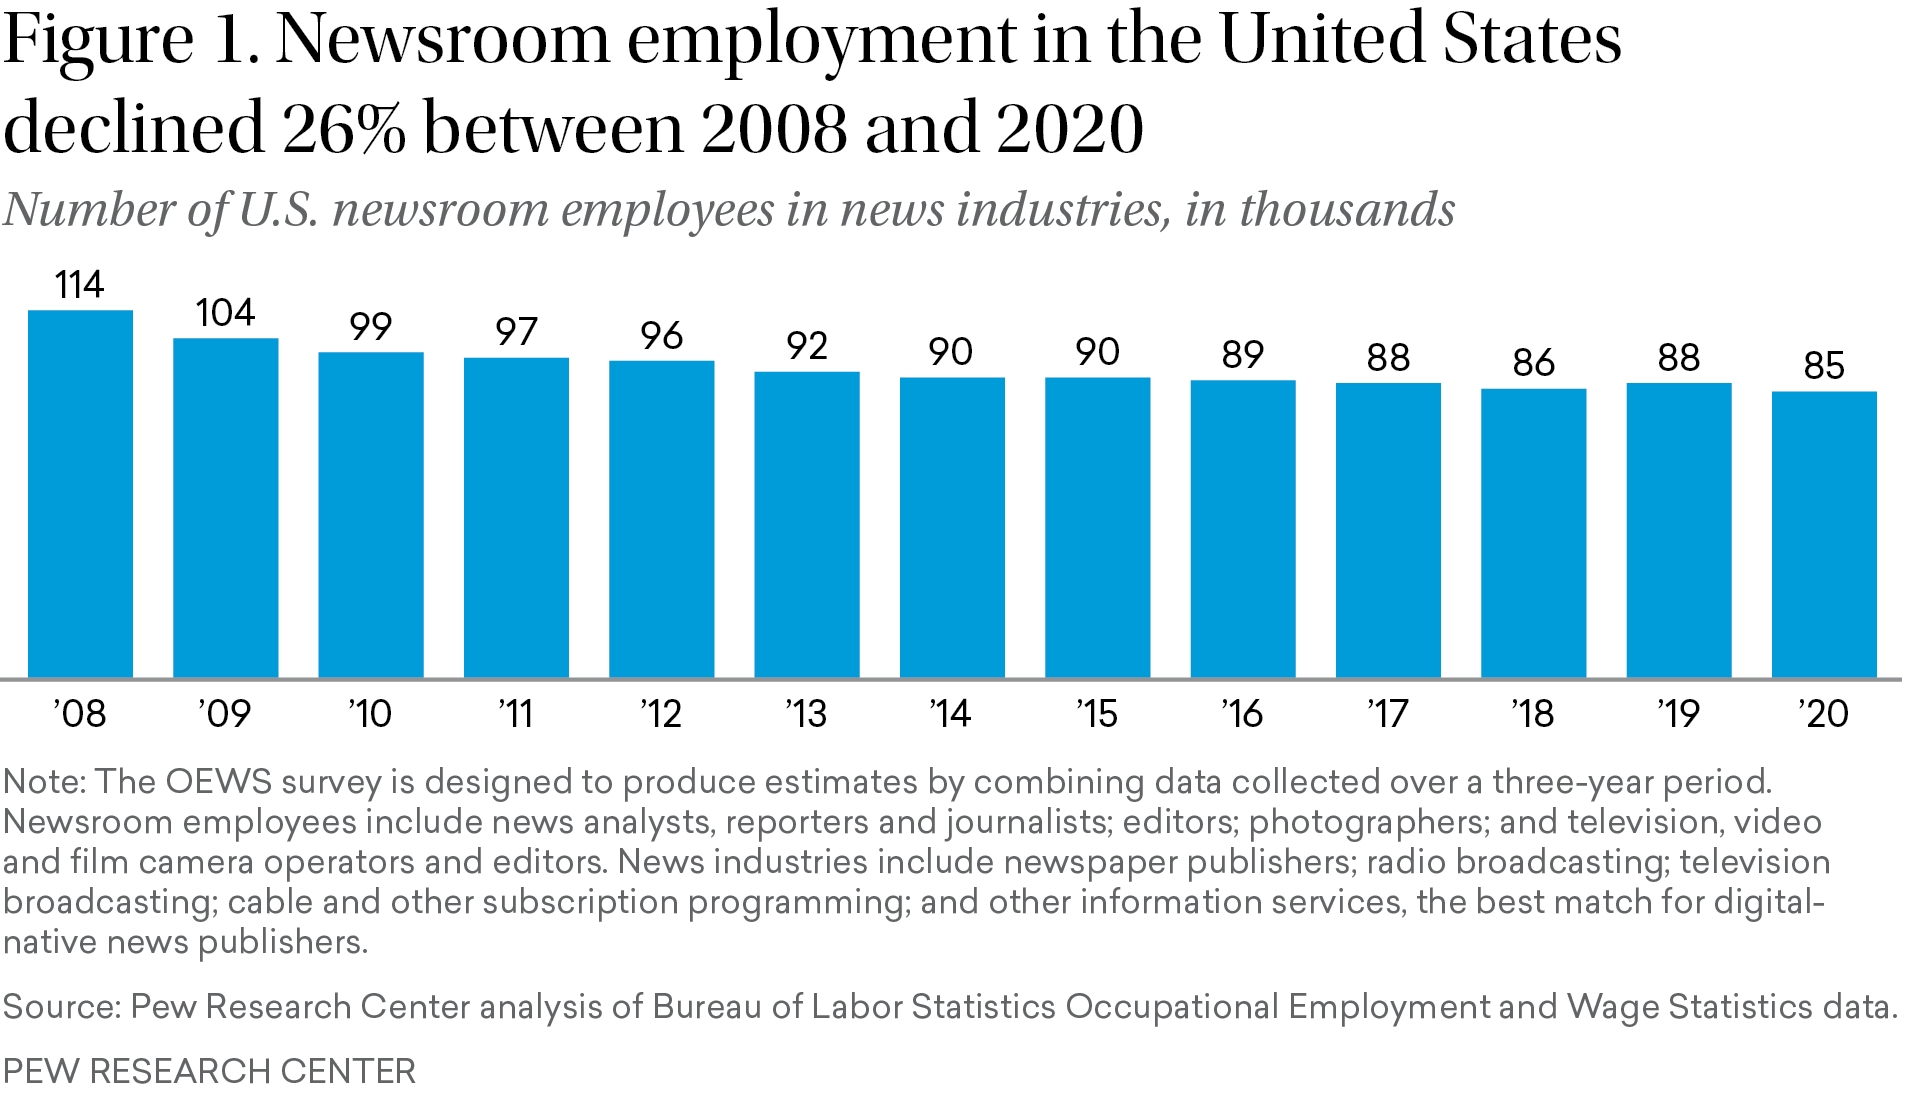 Figure 1: A bar chart shows the number of newsroom employees decreased by almost 30,000 between 2008 and 2020.